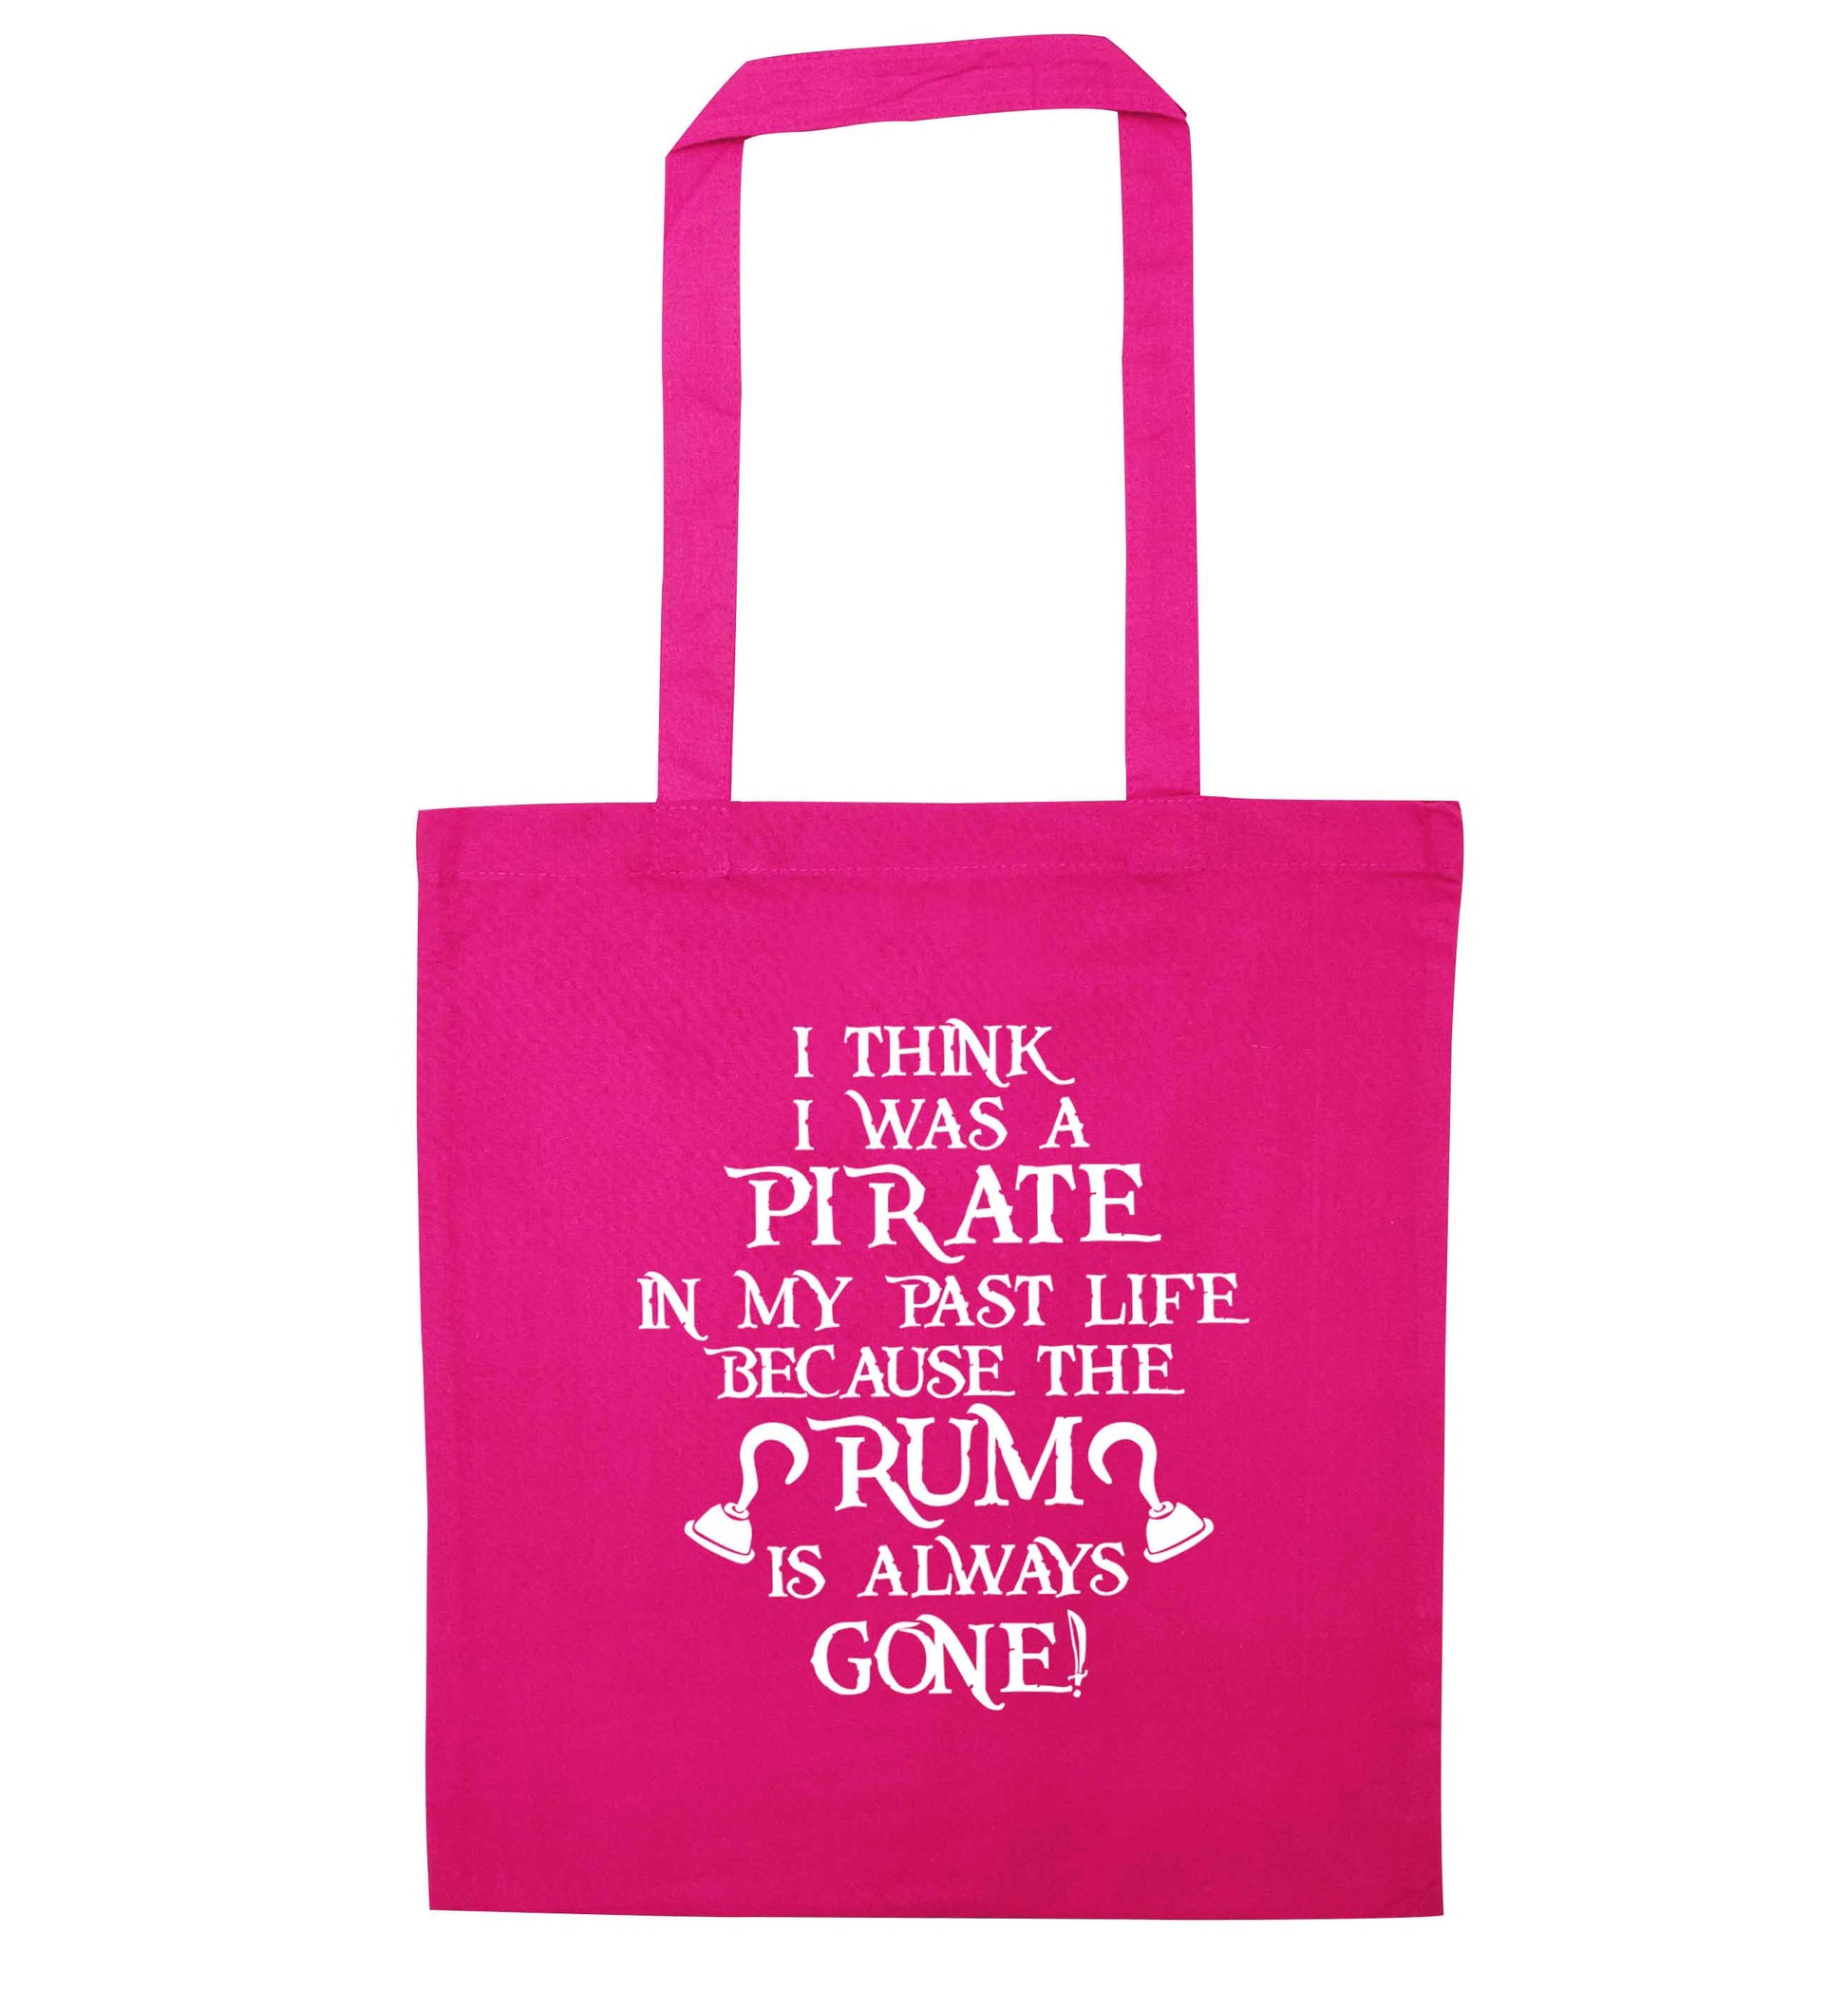 I think I was a pirate in my past life the rum is always gone pink tote bag